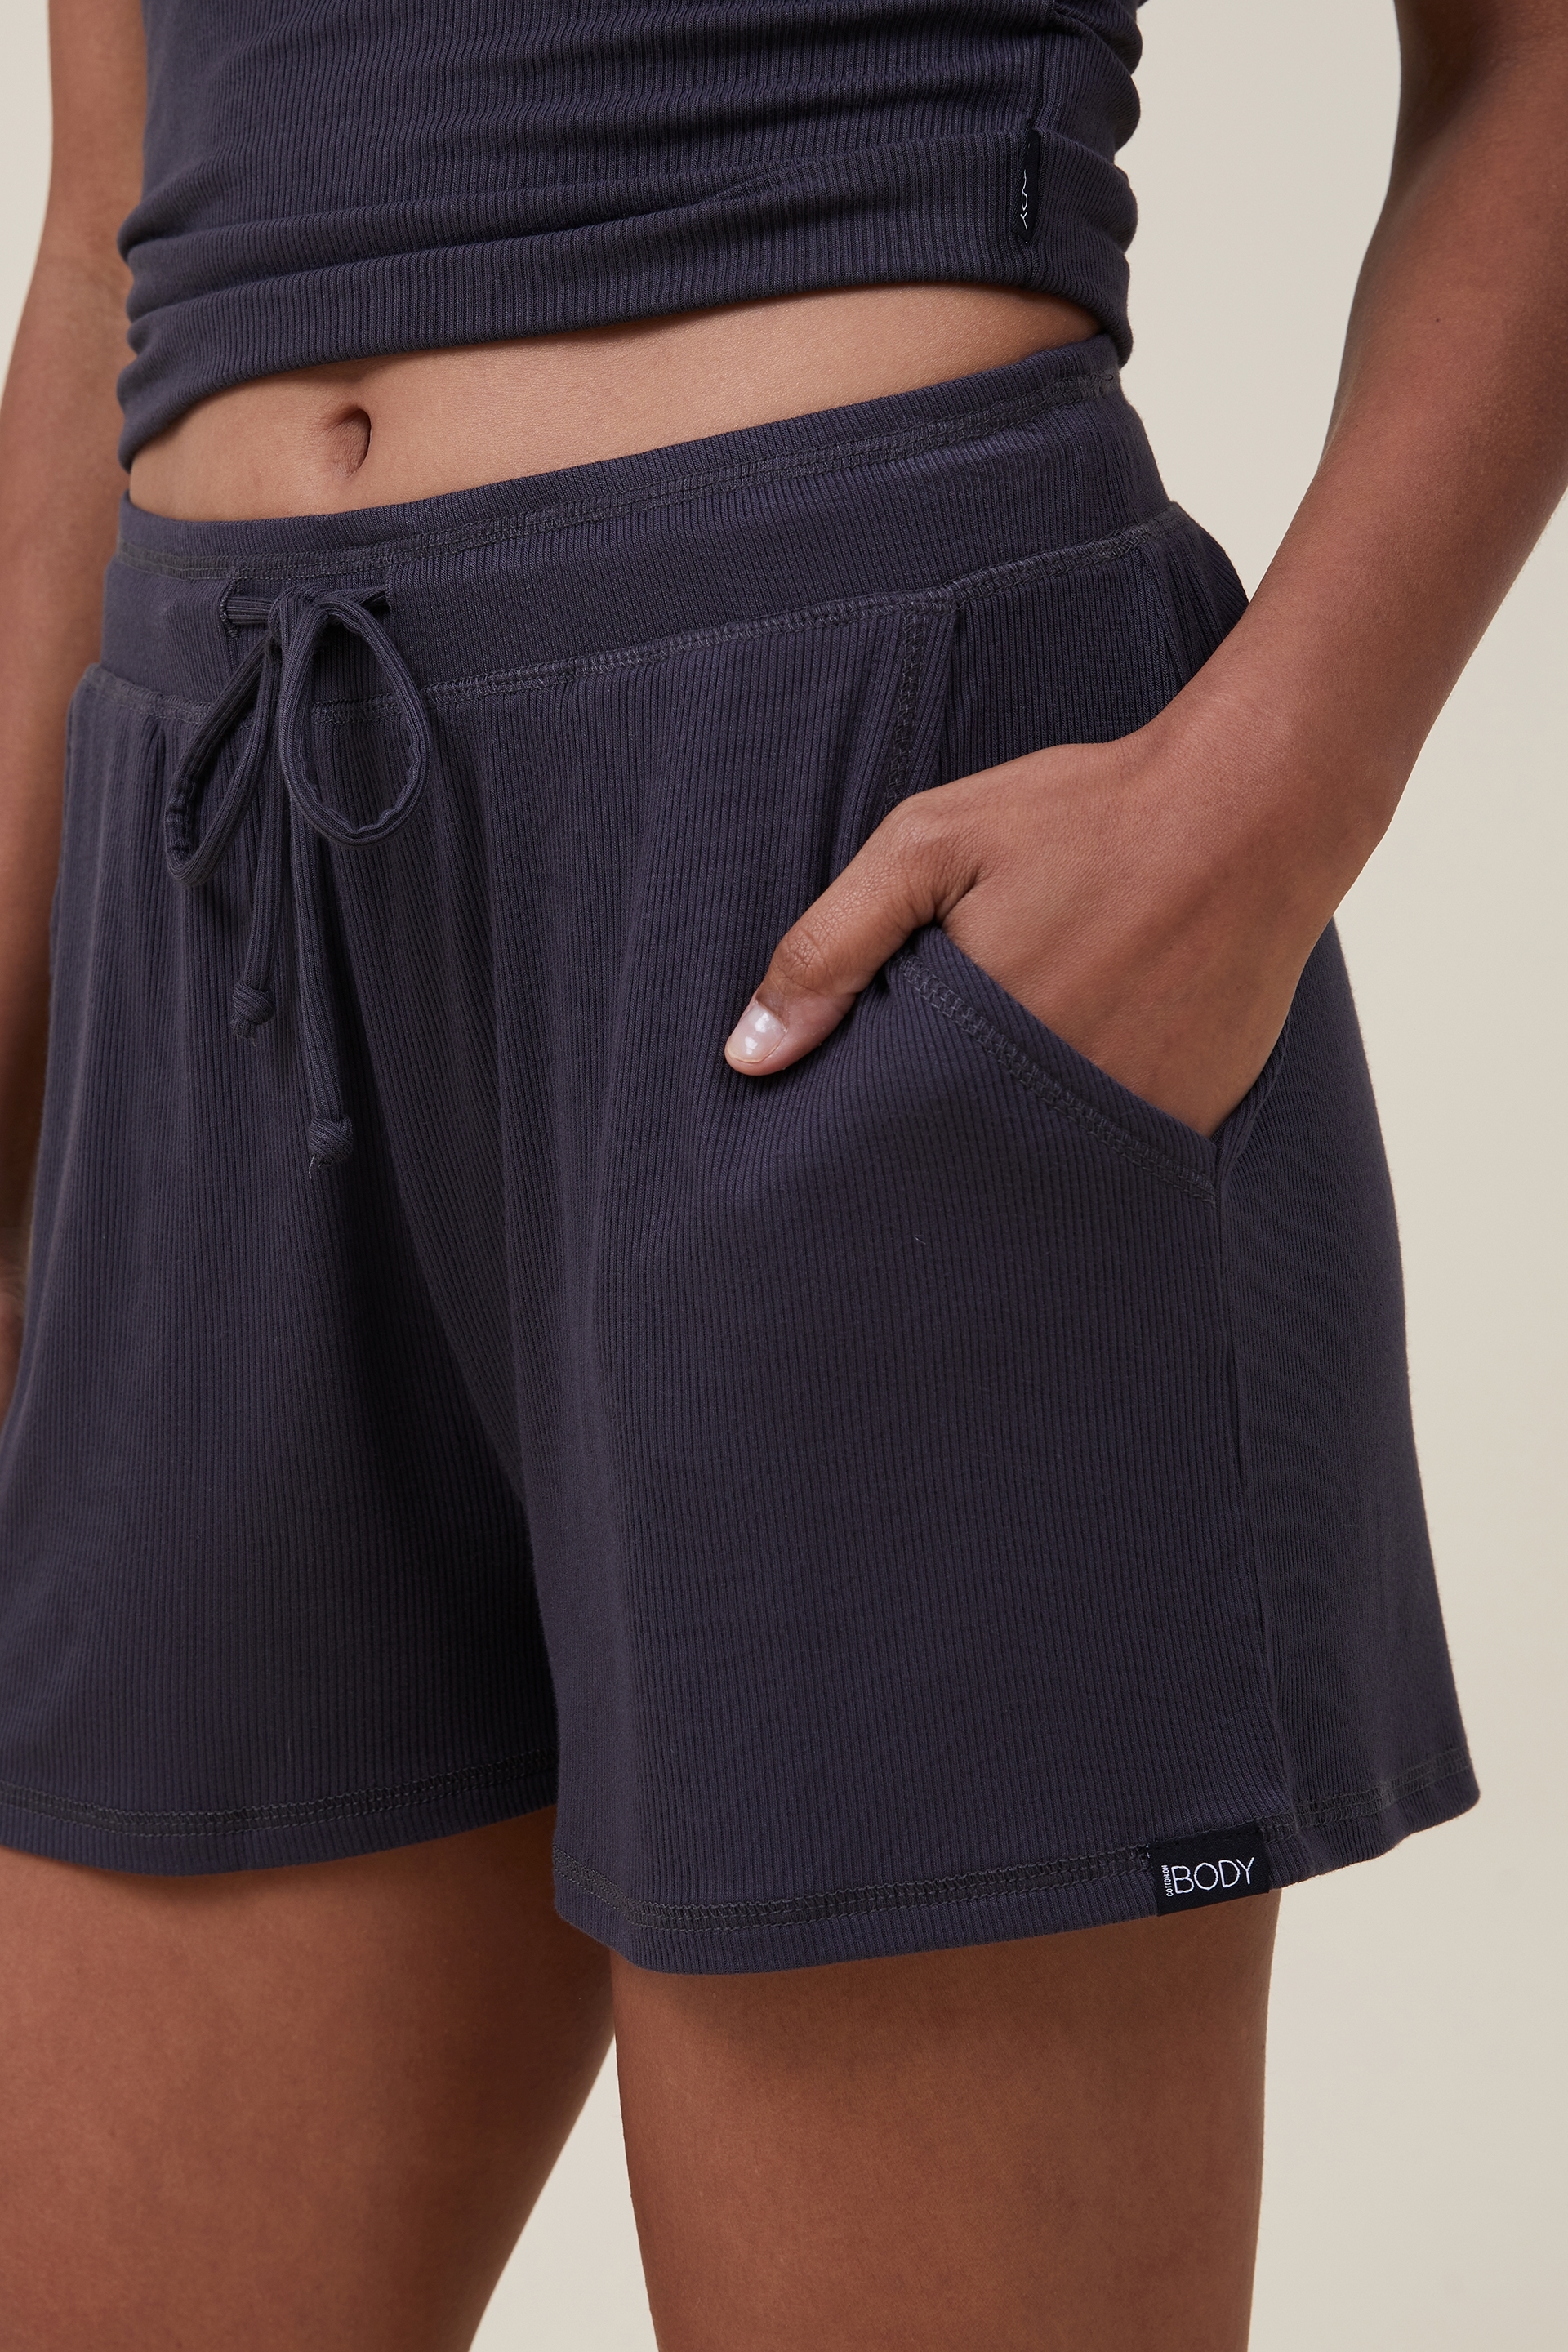 Cotton:On super soft sleep shorts in gray